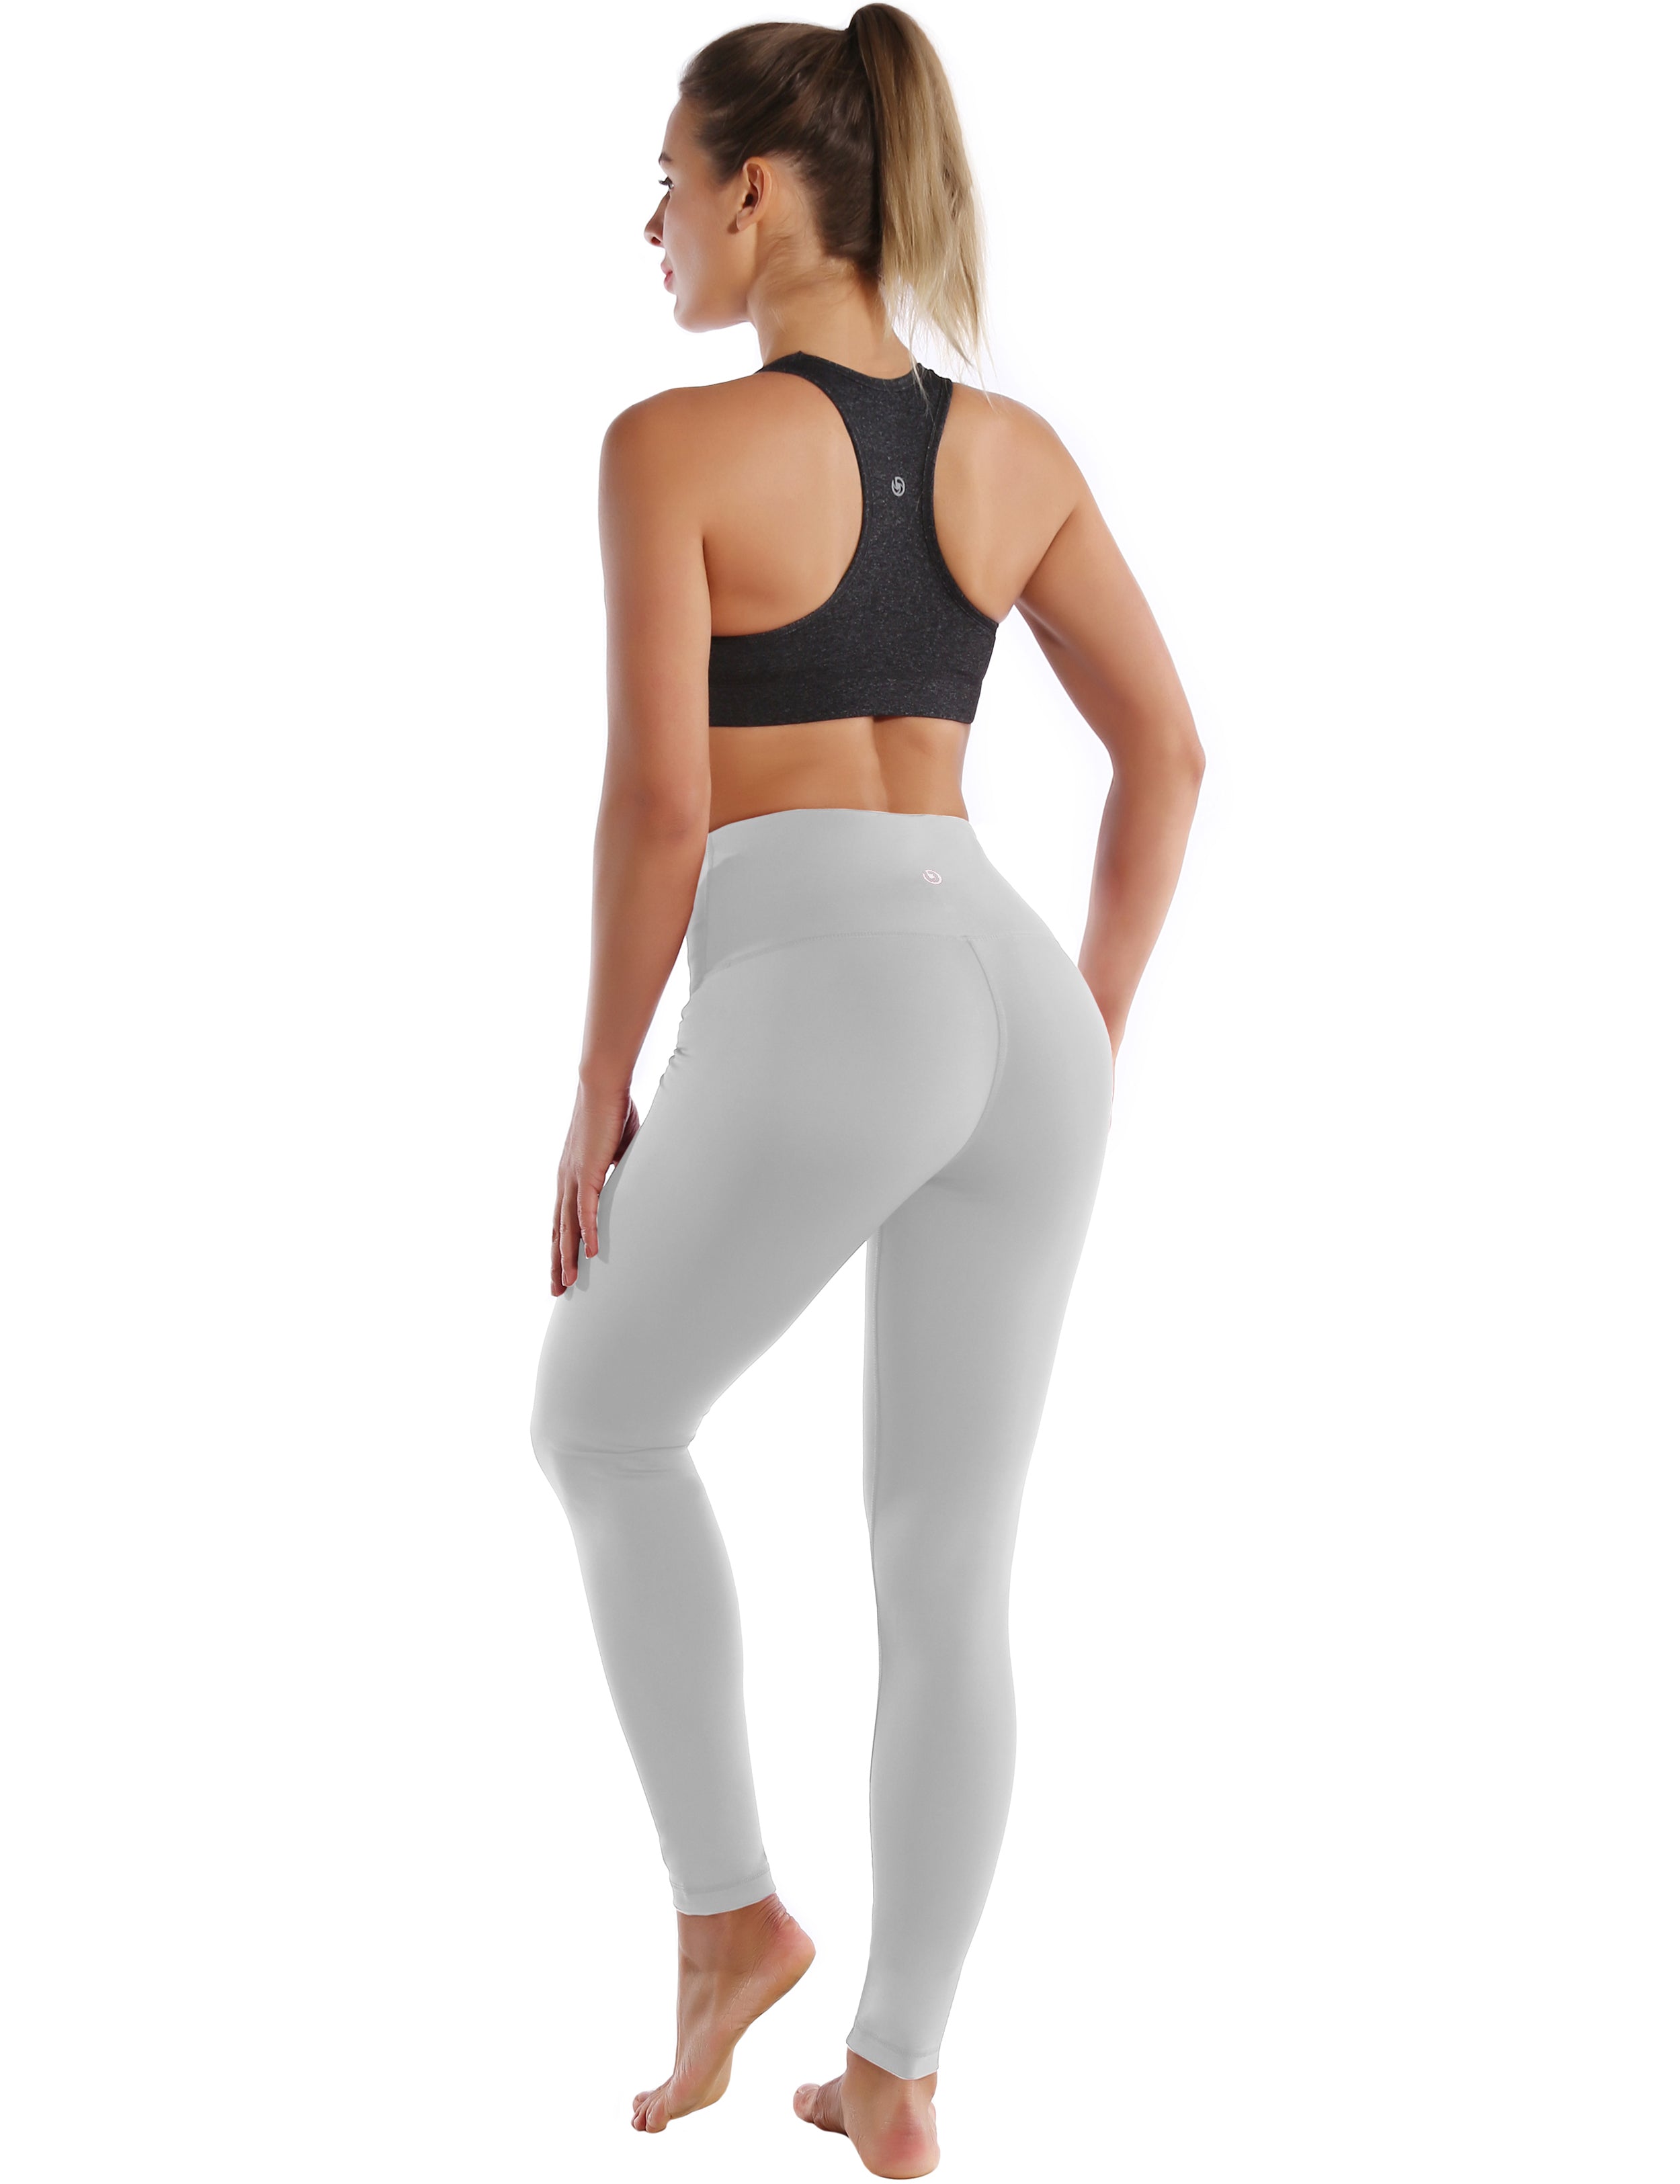 High Waist Yoga Pants lightgray 75%Nylon/25%Spandex Fabric doesn't attract lint easily 4-way stretch No see-through Moisture-wicking Tummy control Inner pocket Four lengths